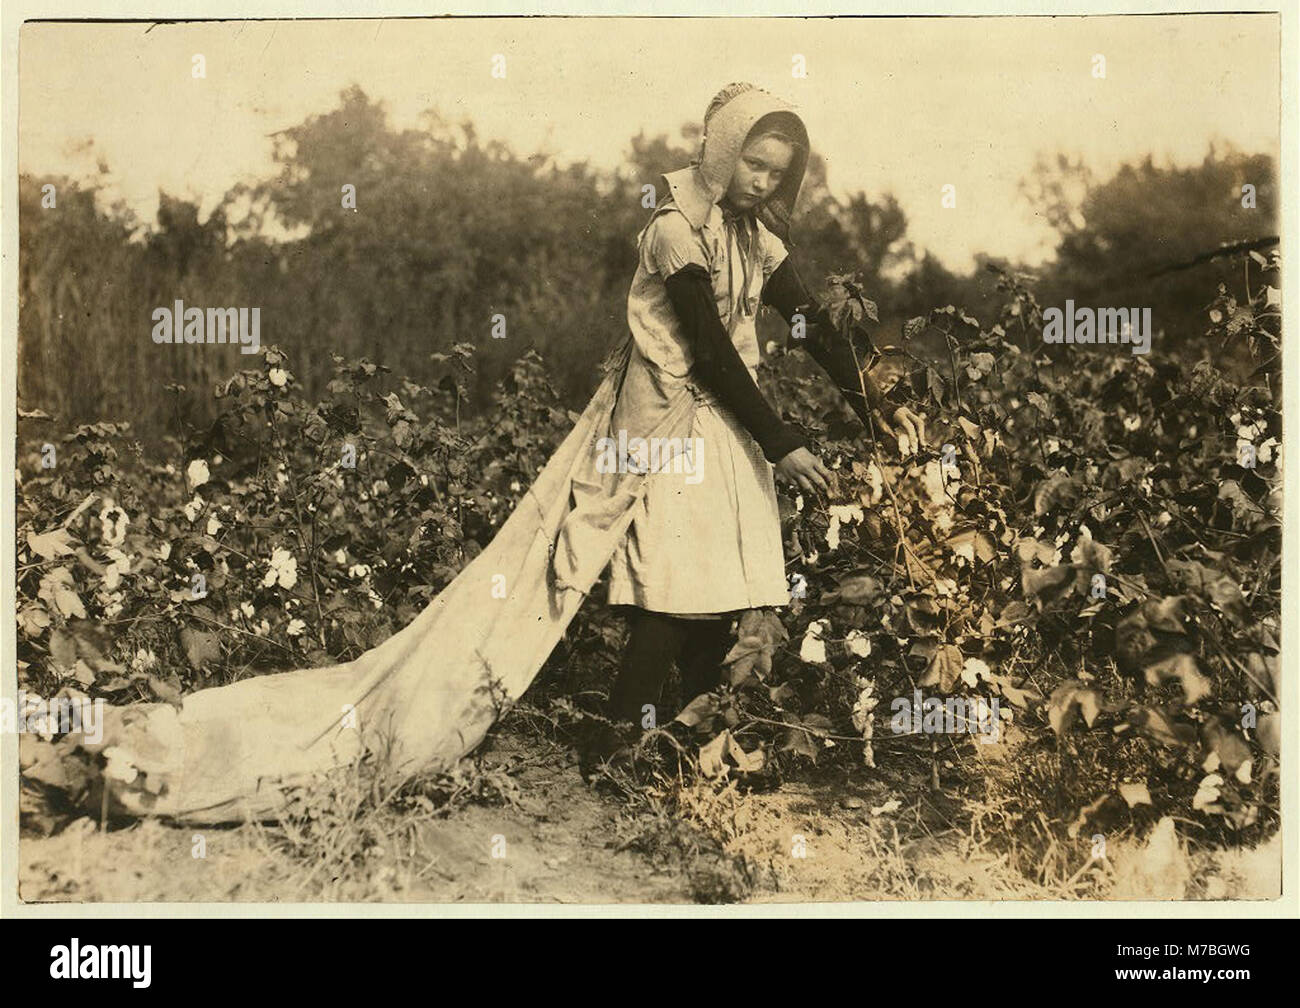 Callie Campbell, 11 years old, picks 75 to 125 pounds of cotton a day, and totes 50 pounds of it when sack gets full. 'No, I don't like it very much.' Lewis W. Hine. See 4590. See W.H. Swift LOC nclc.00629 Stock Photo